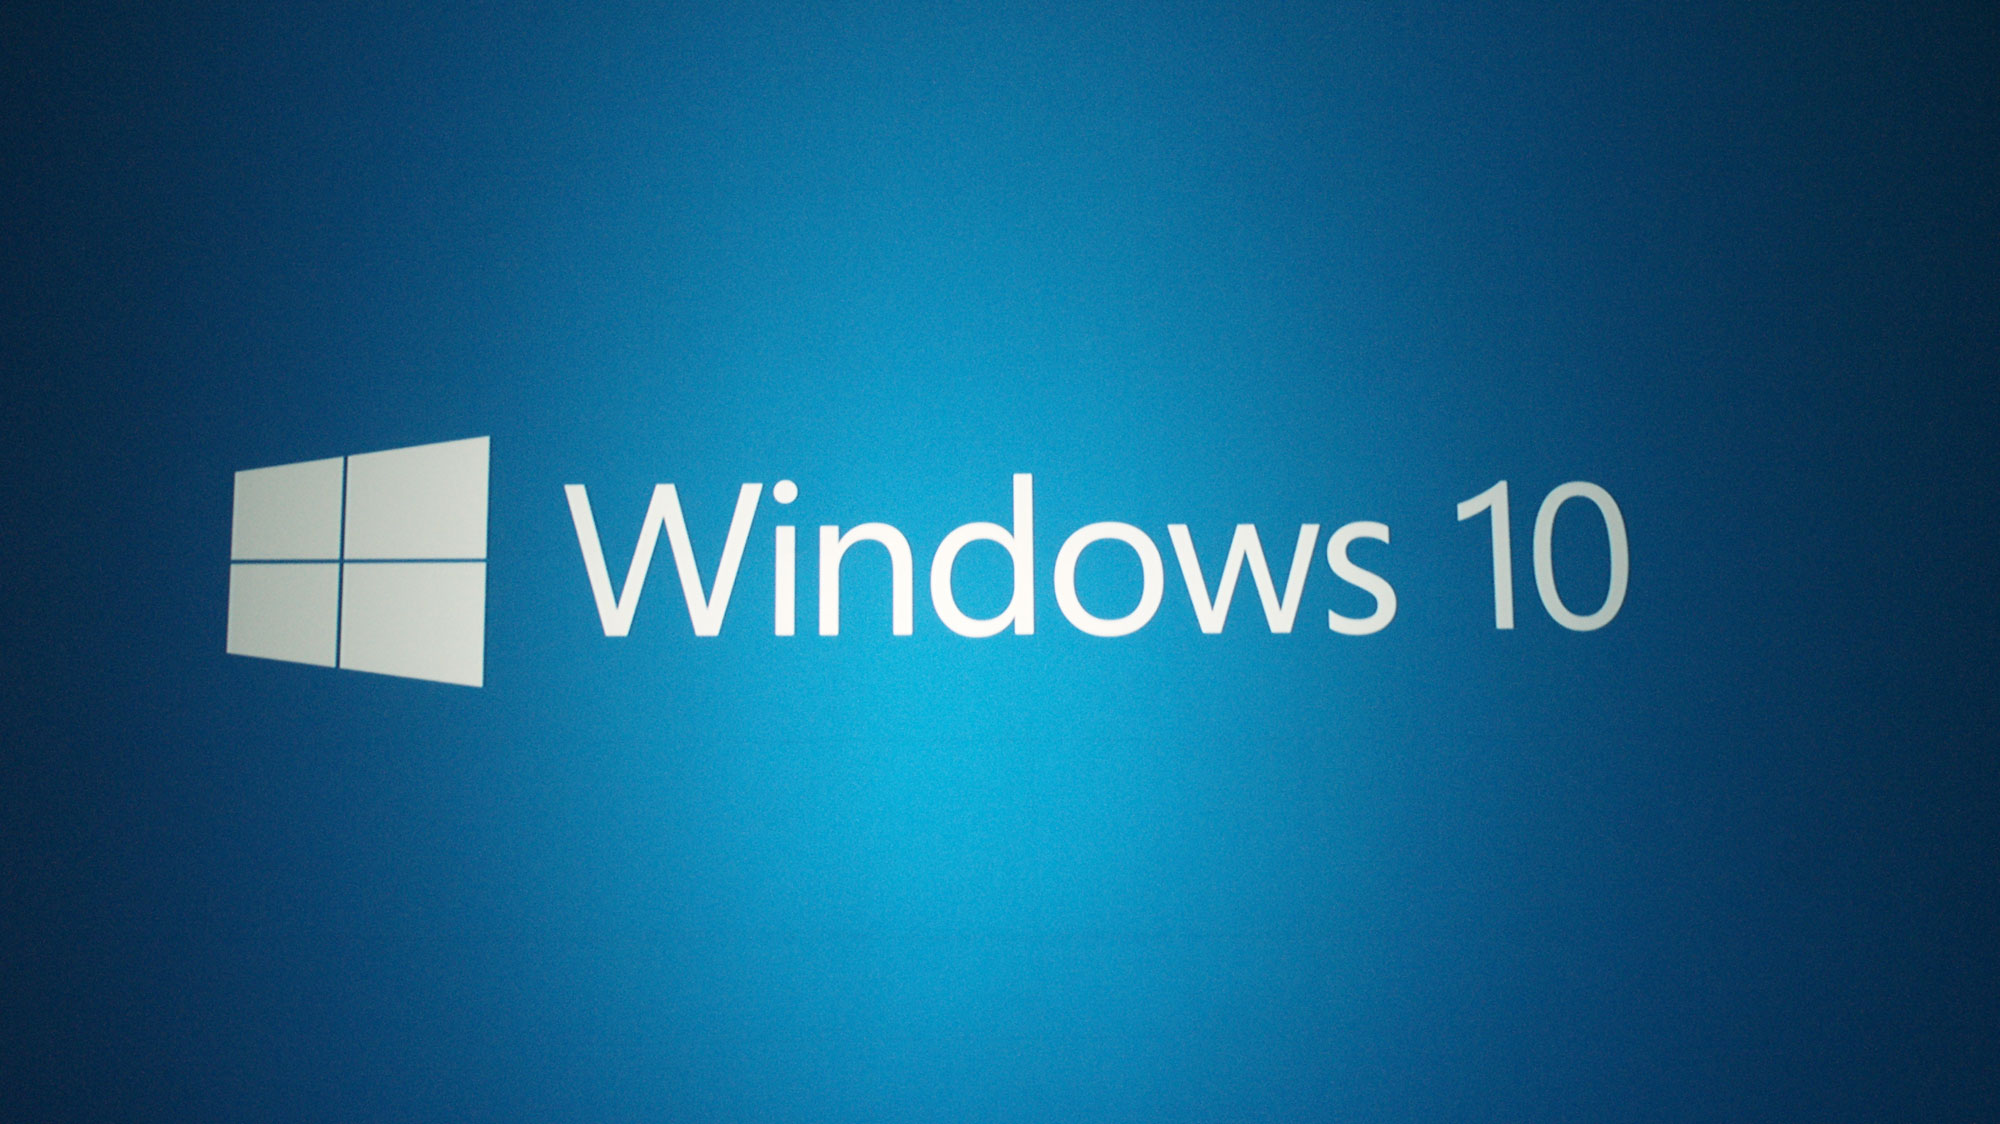 Even Windows 10 can39;t stop the decline in PC sales